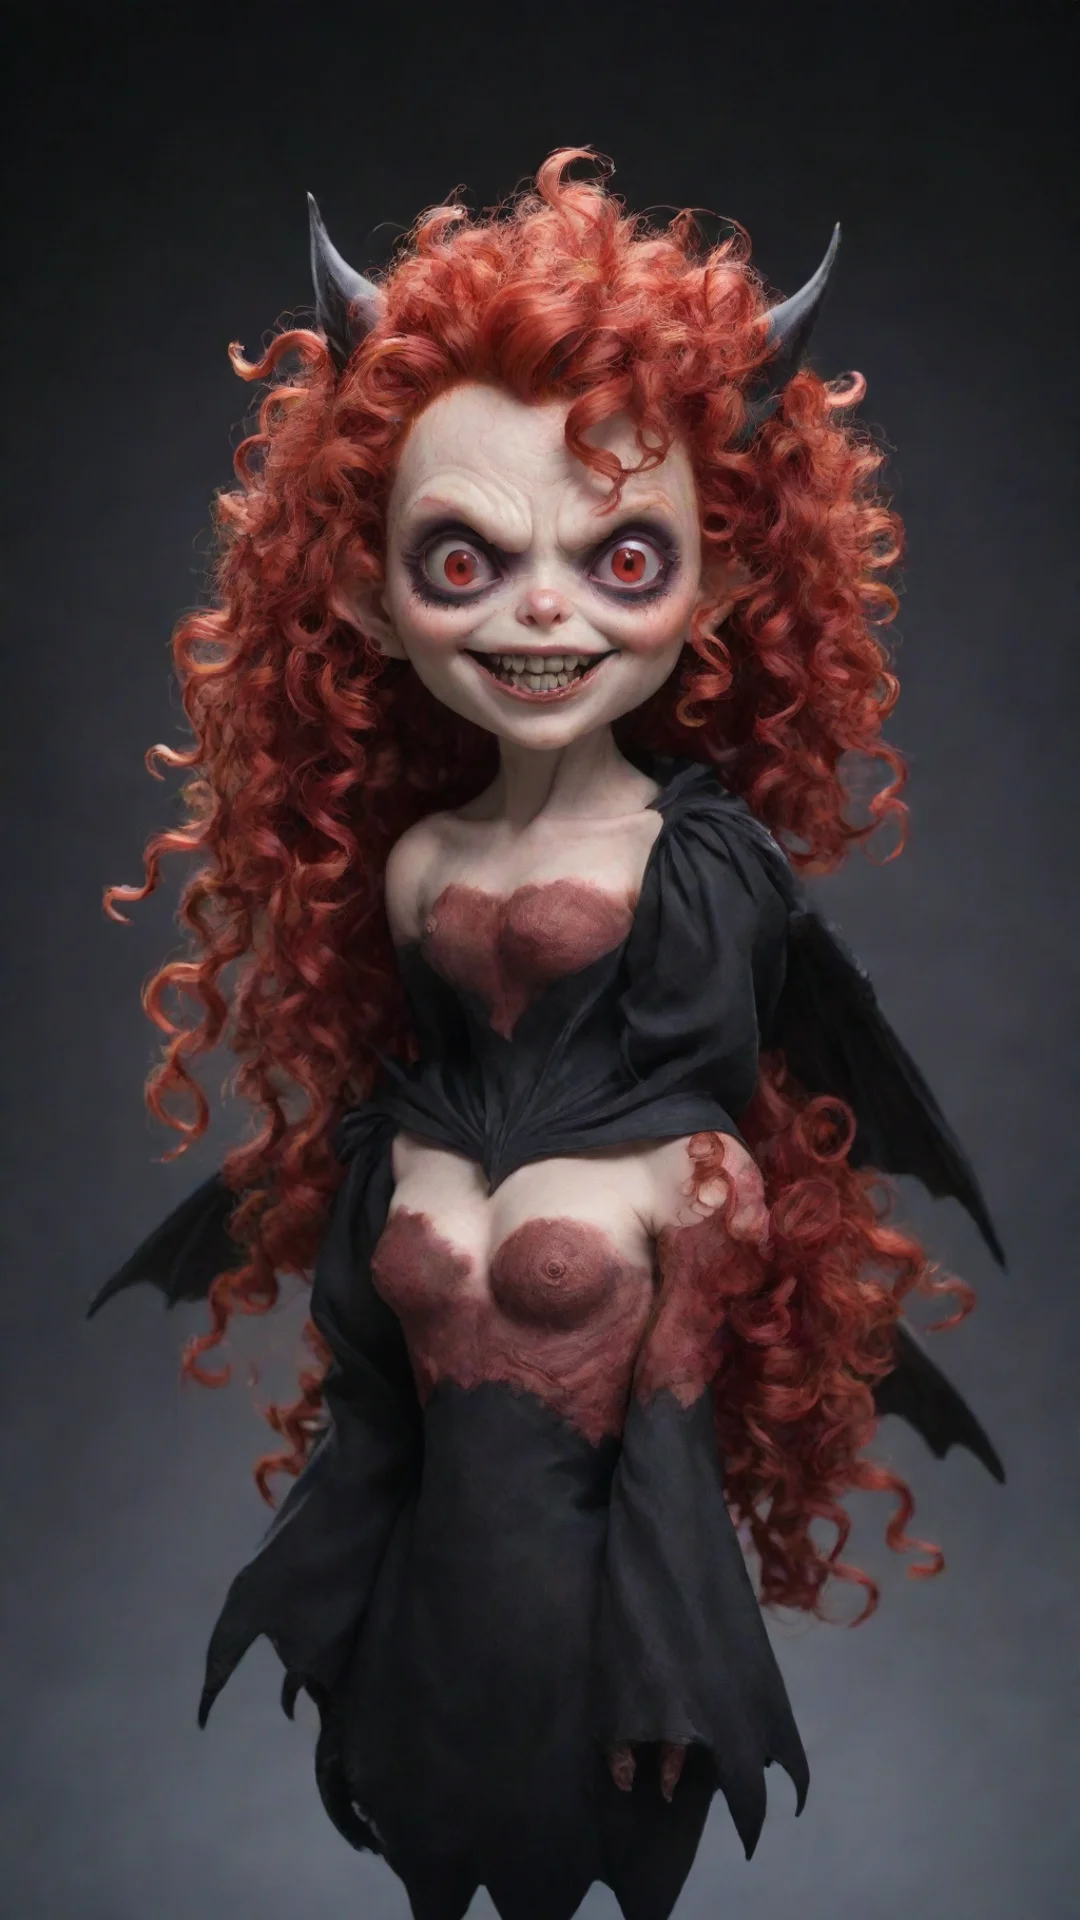 aia bat demon with red curly hair. tall